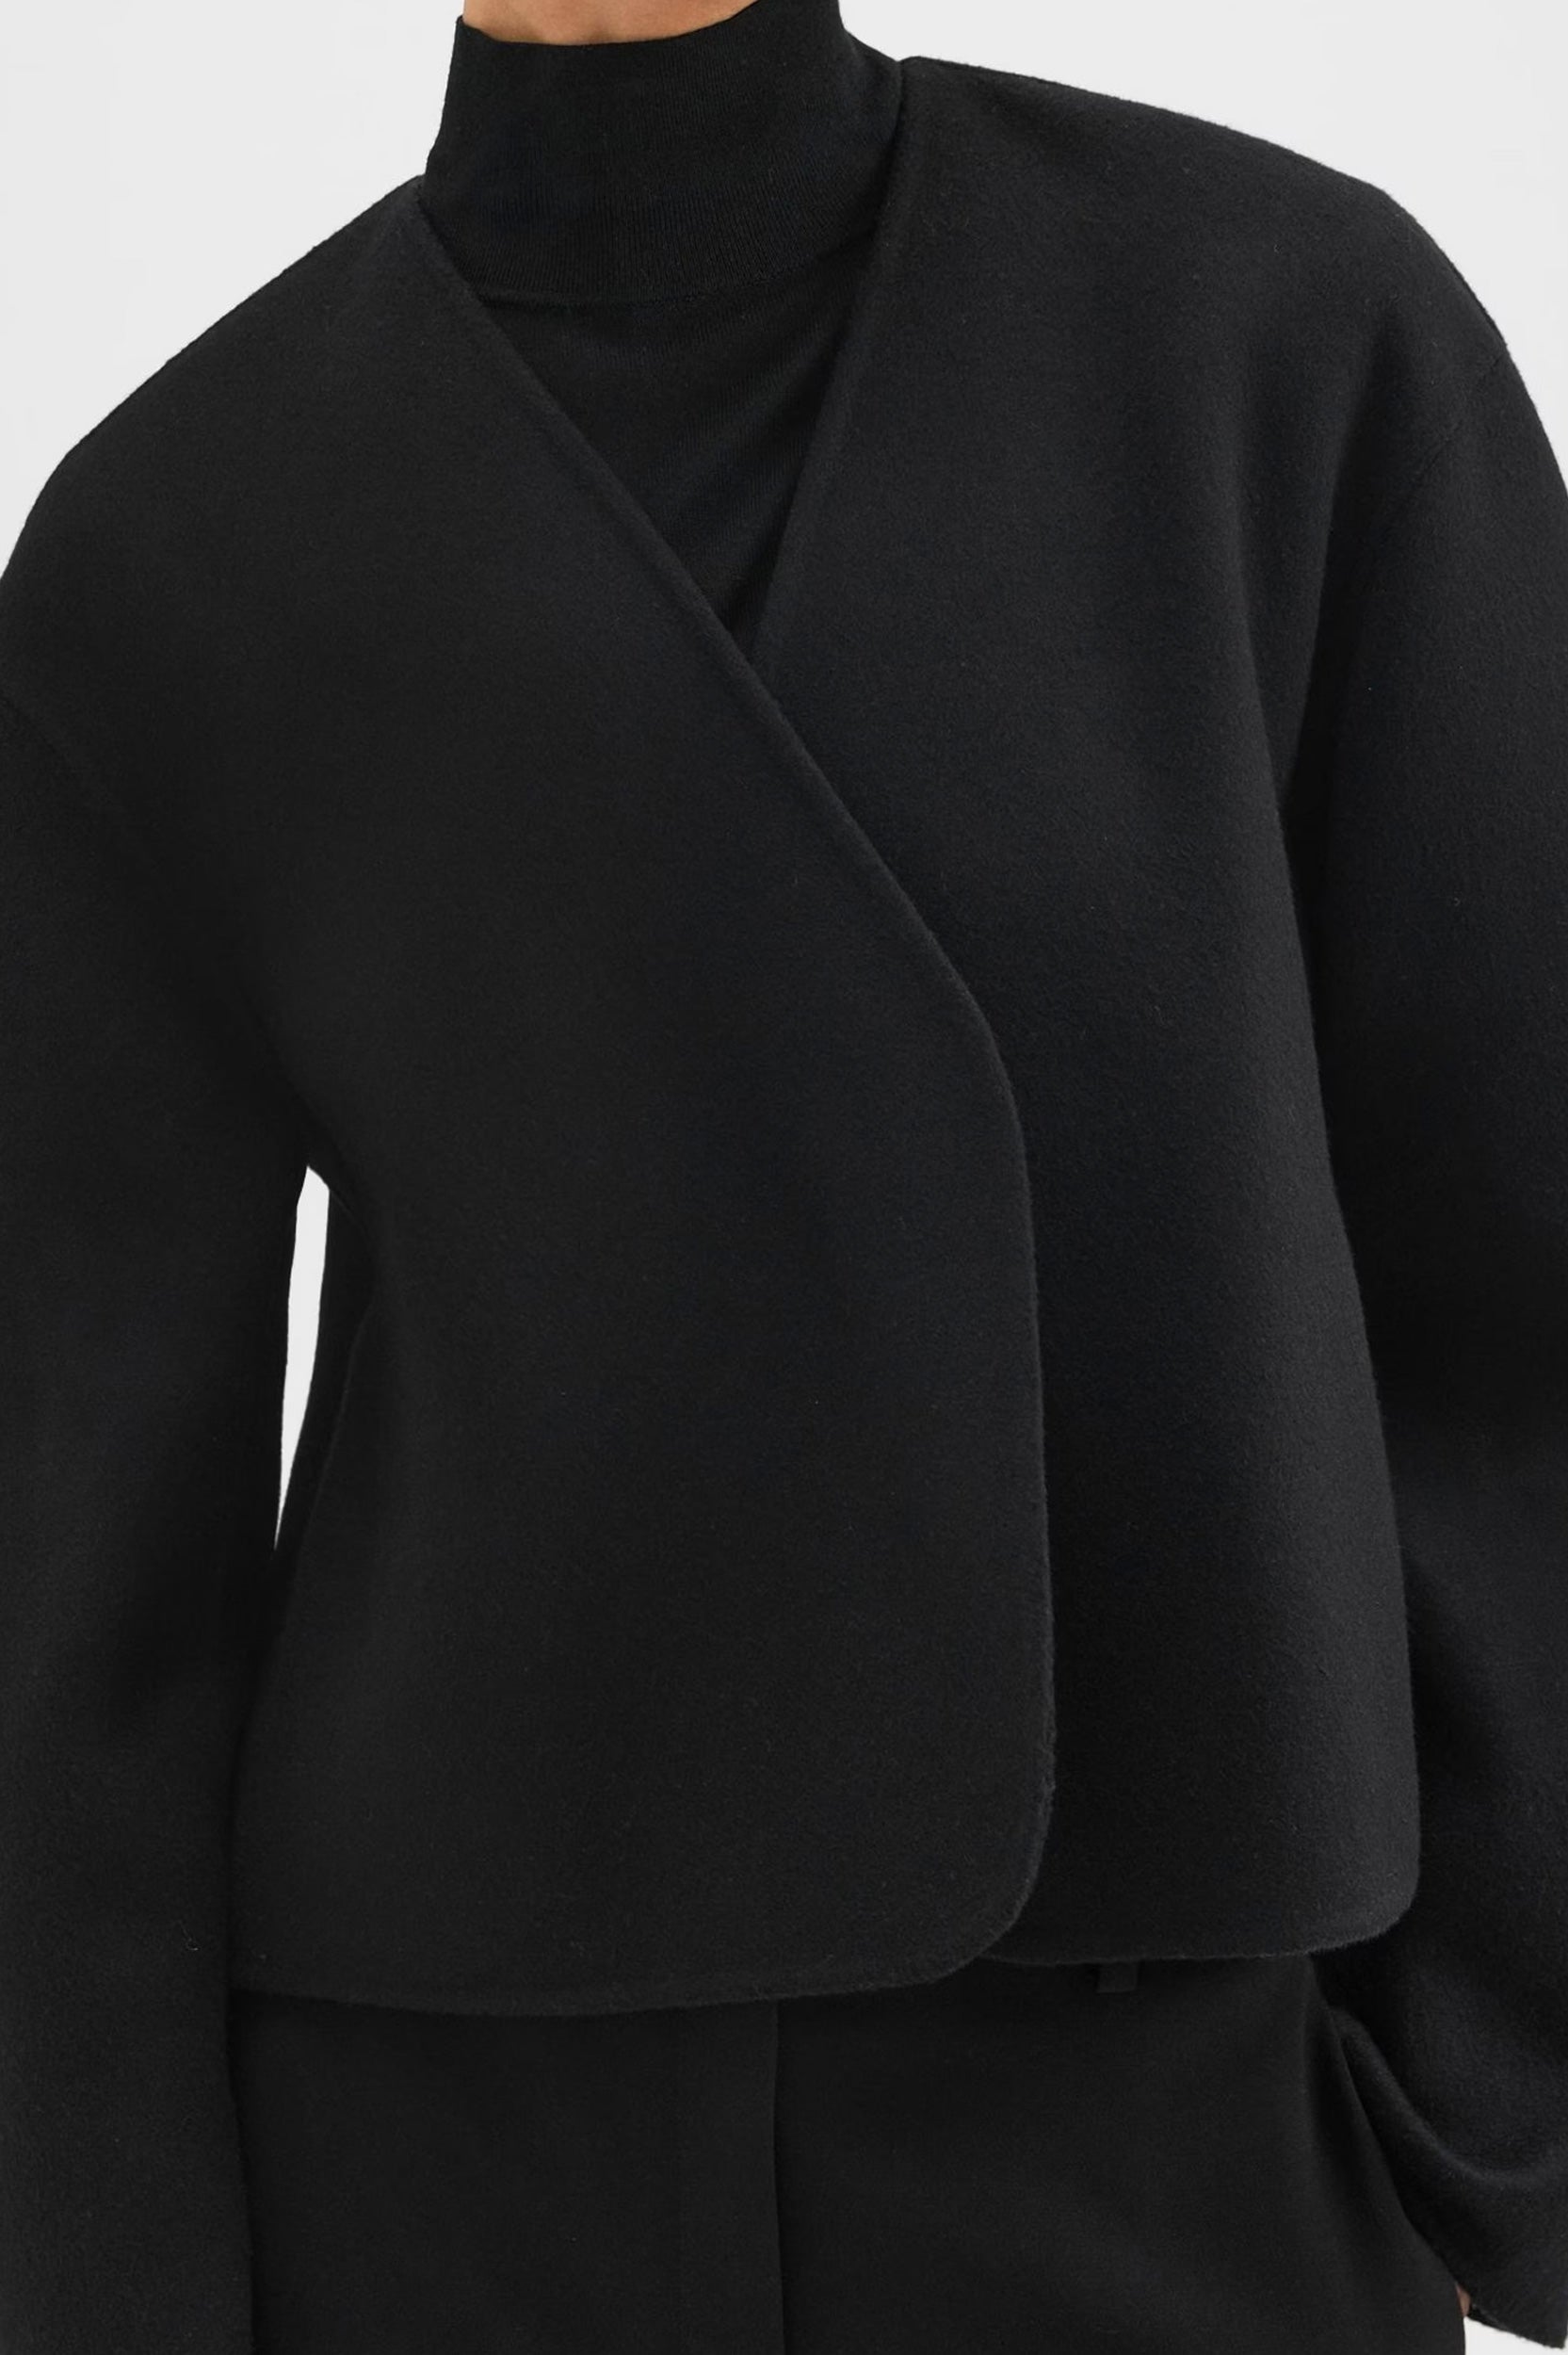 Rounded Crop Jacket in Black